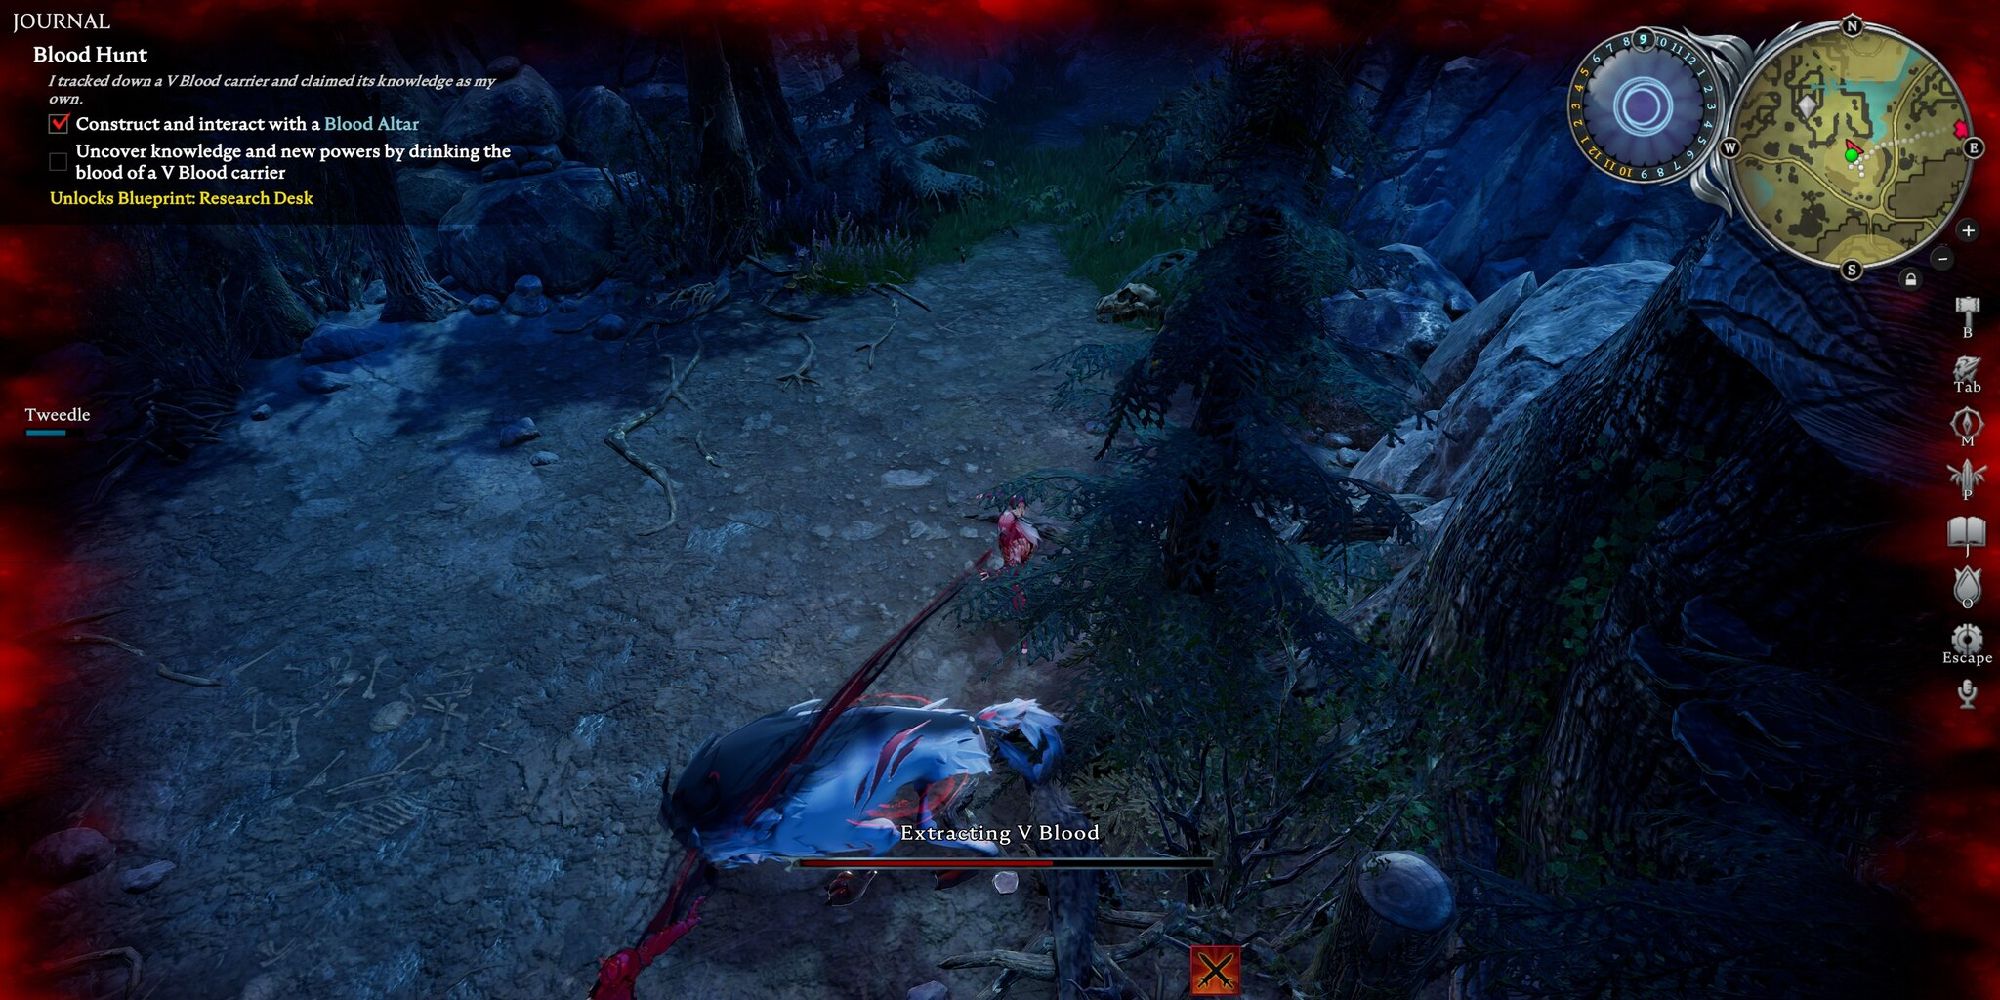 player extracting blood from alpha wolf